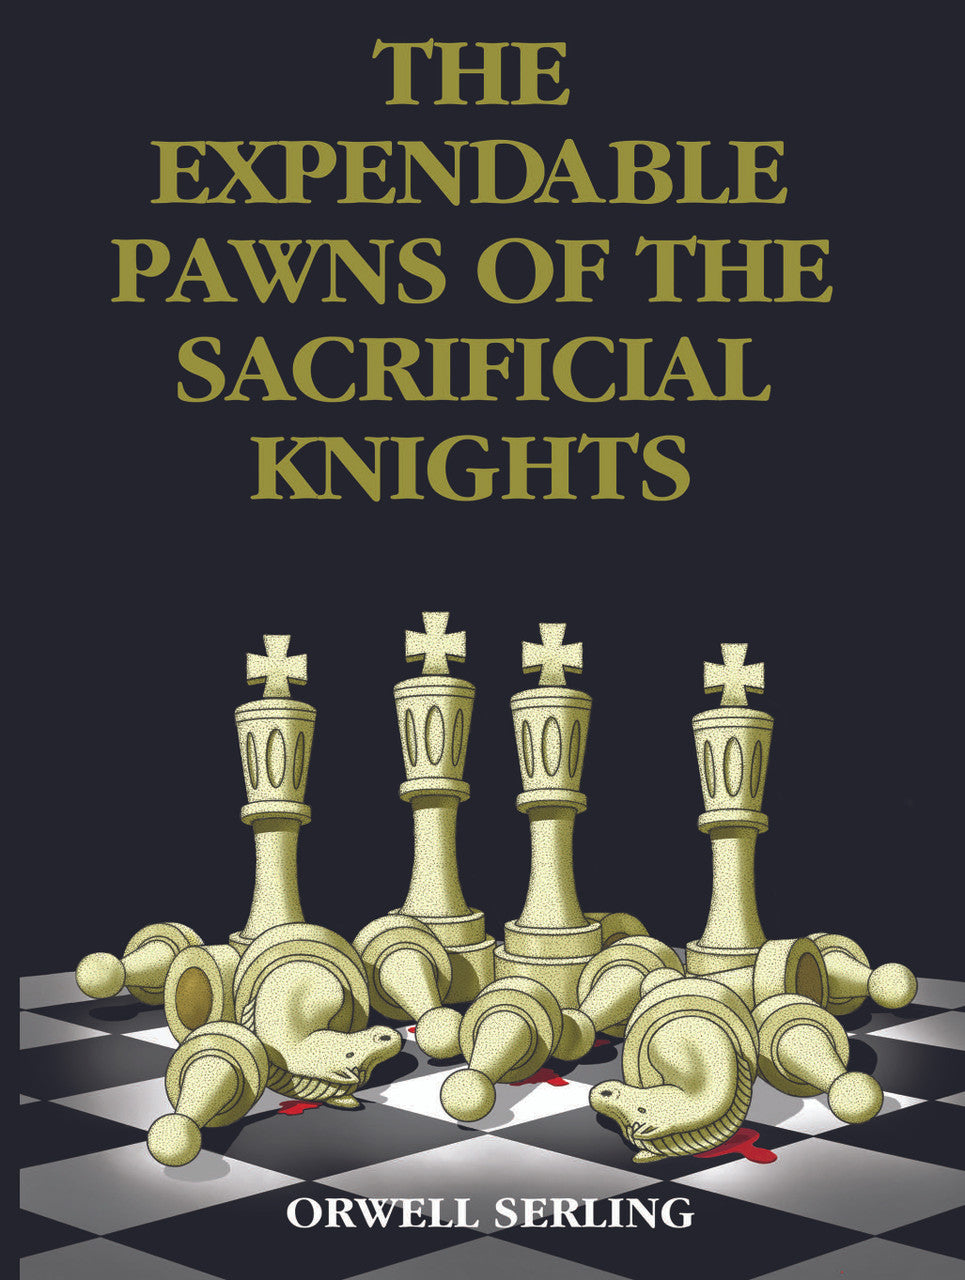 The Expendable Pawns Of The Sacrificial Knights